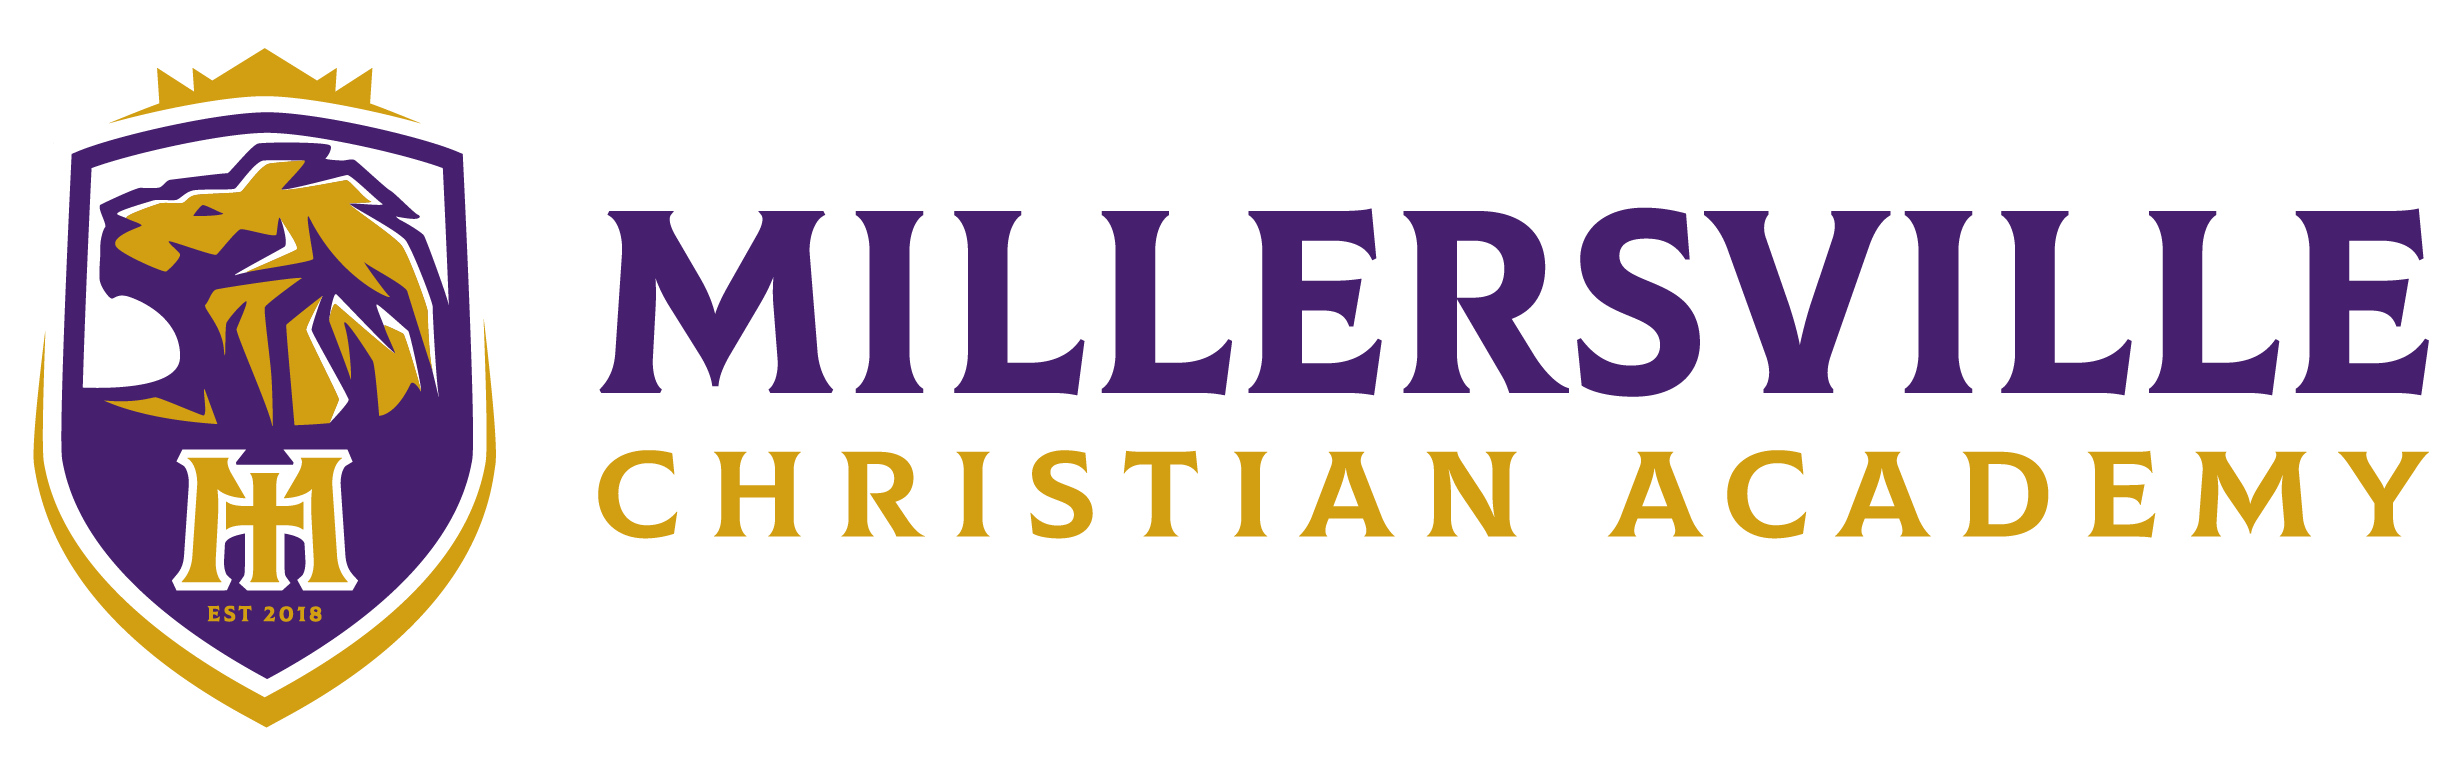 Millersville Christian Academy | Think, Learn & Live for Jesus Christ